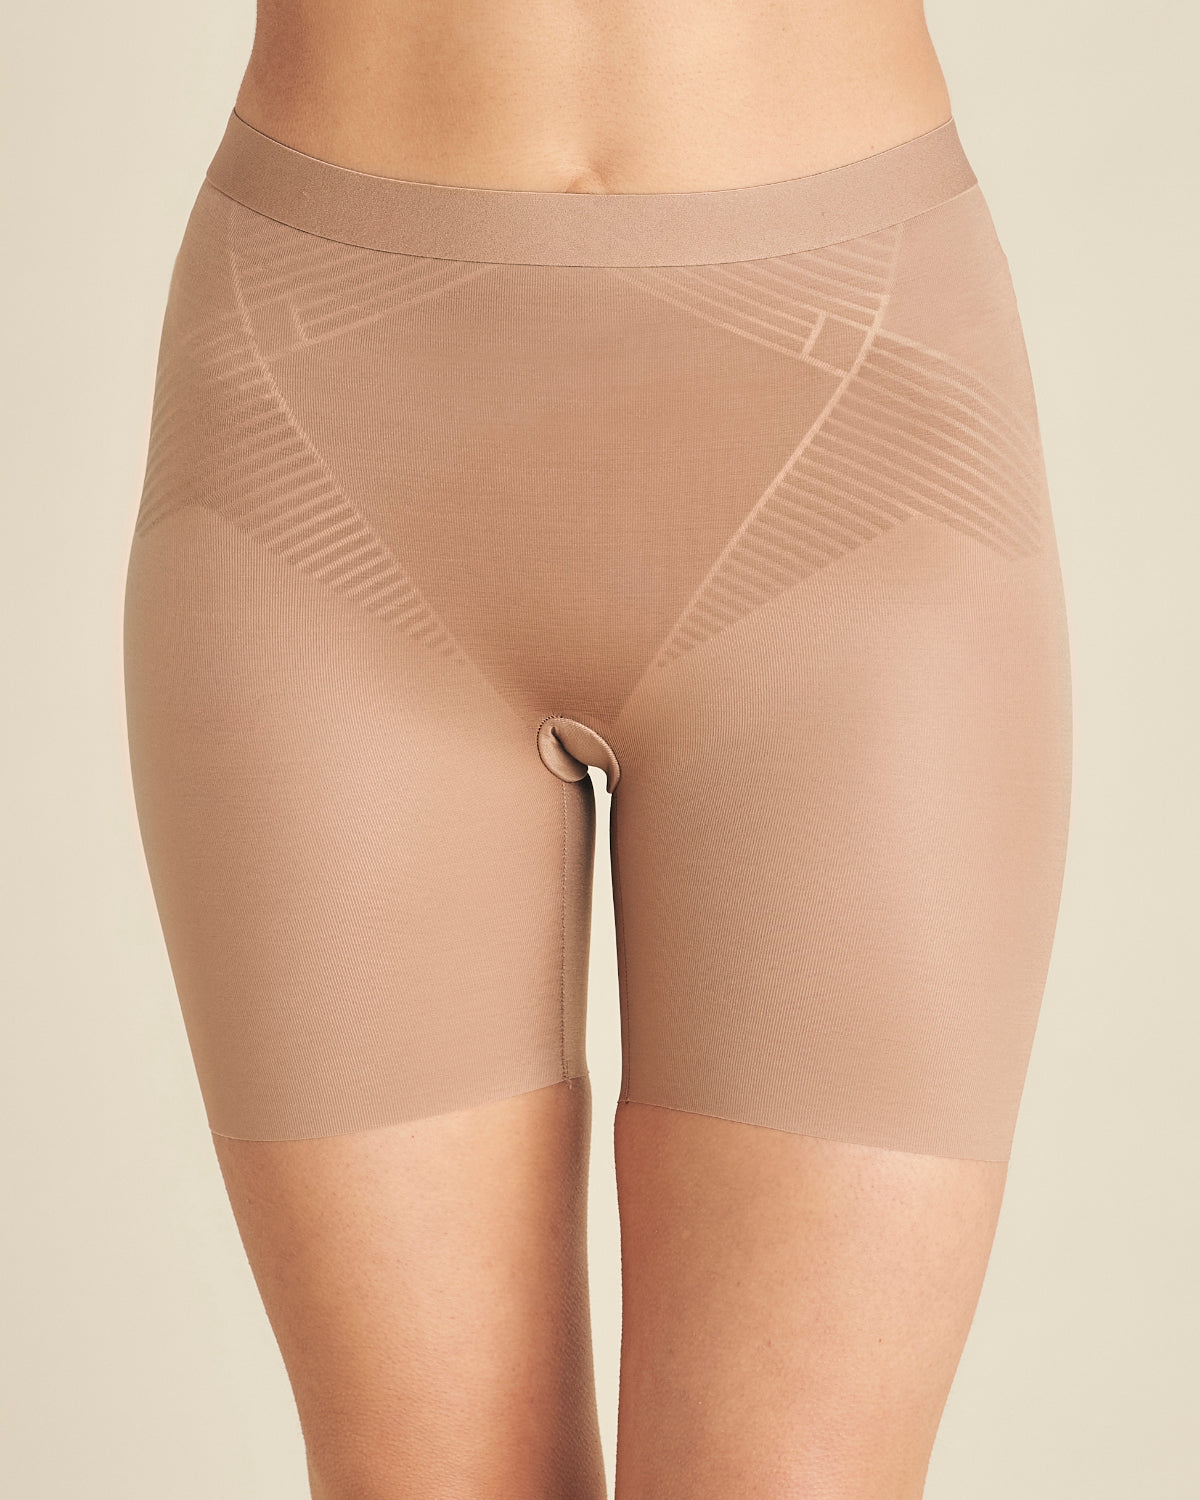 Praliné Slimming Shorts by SPANX